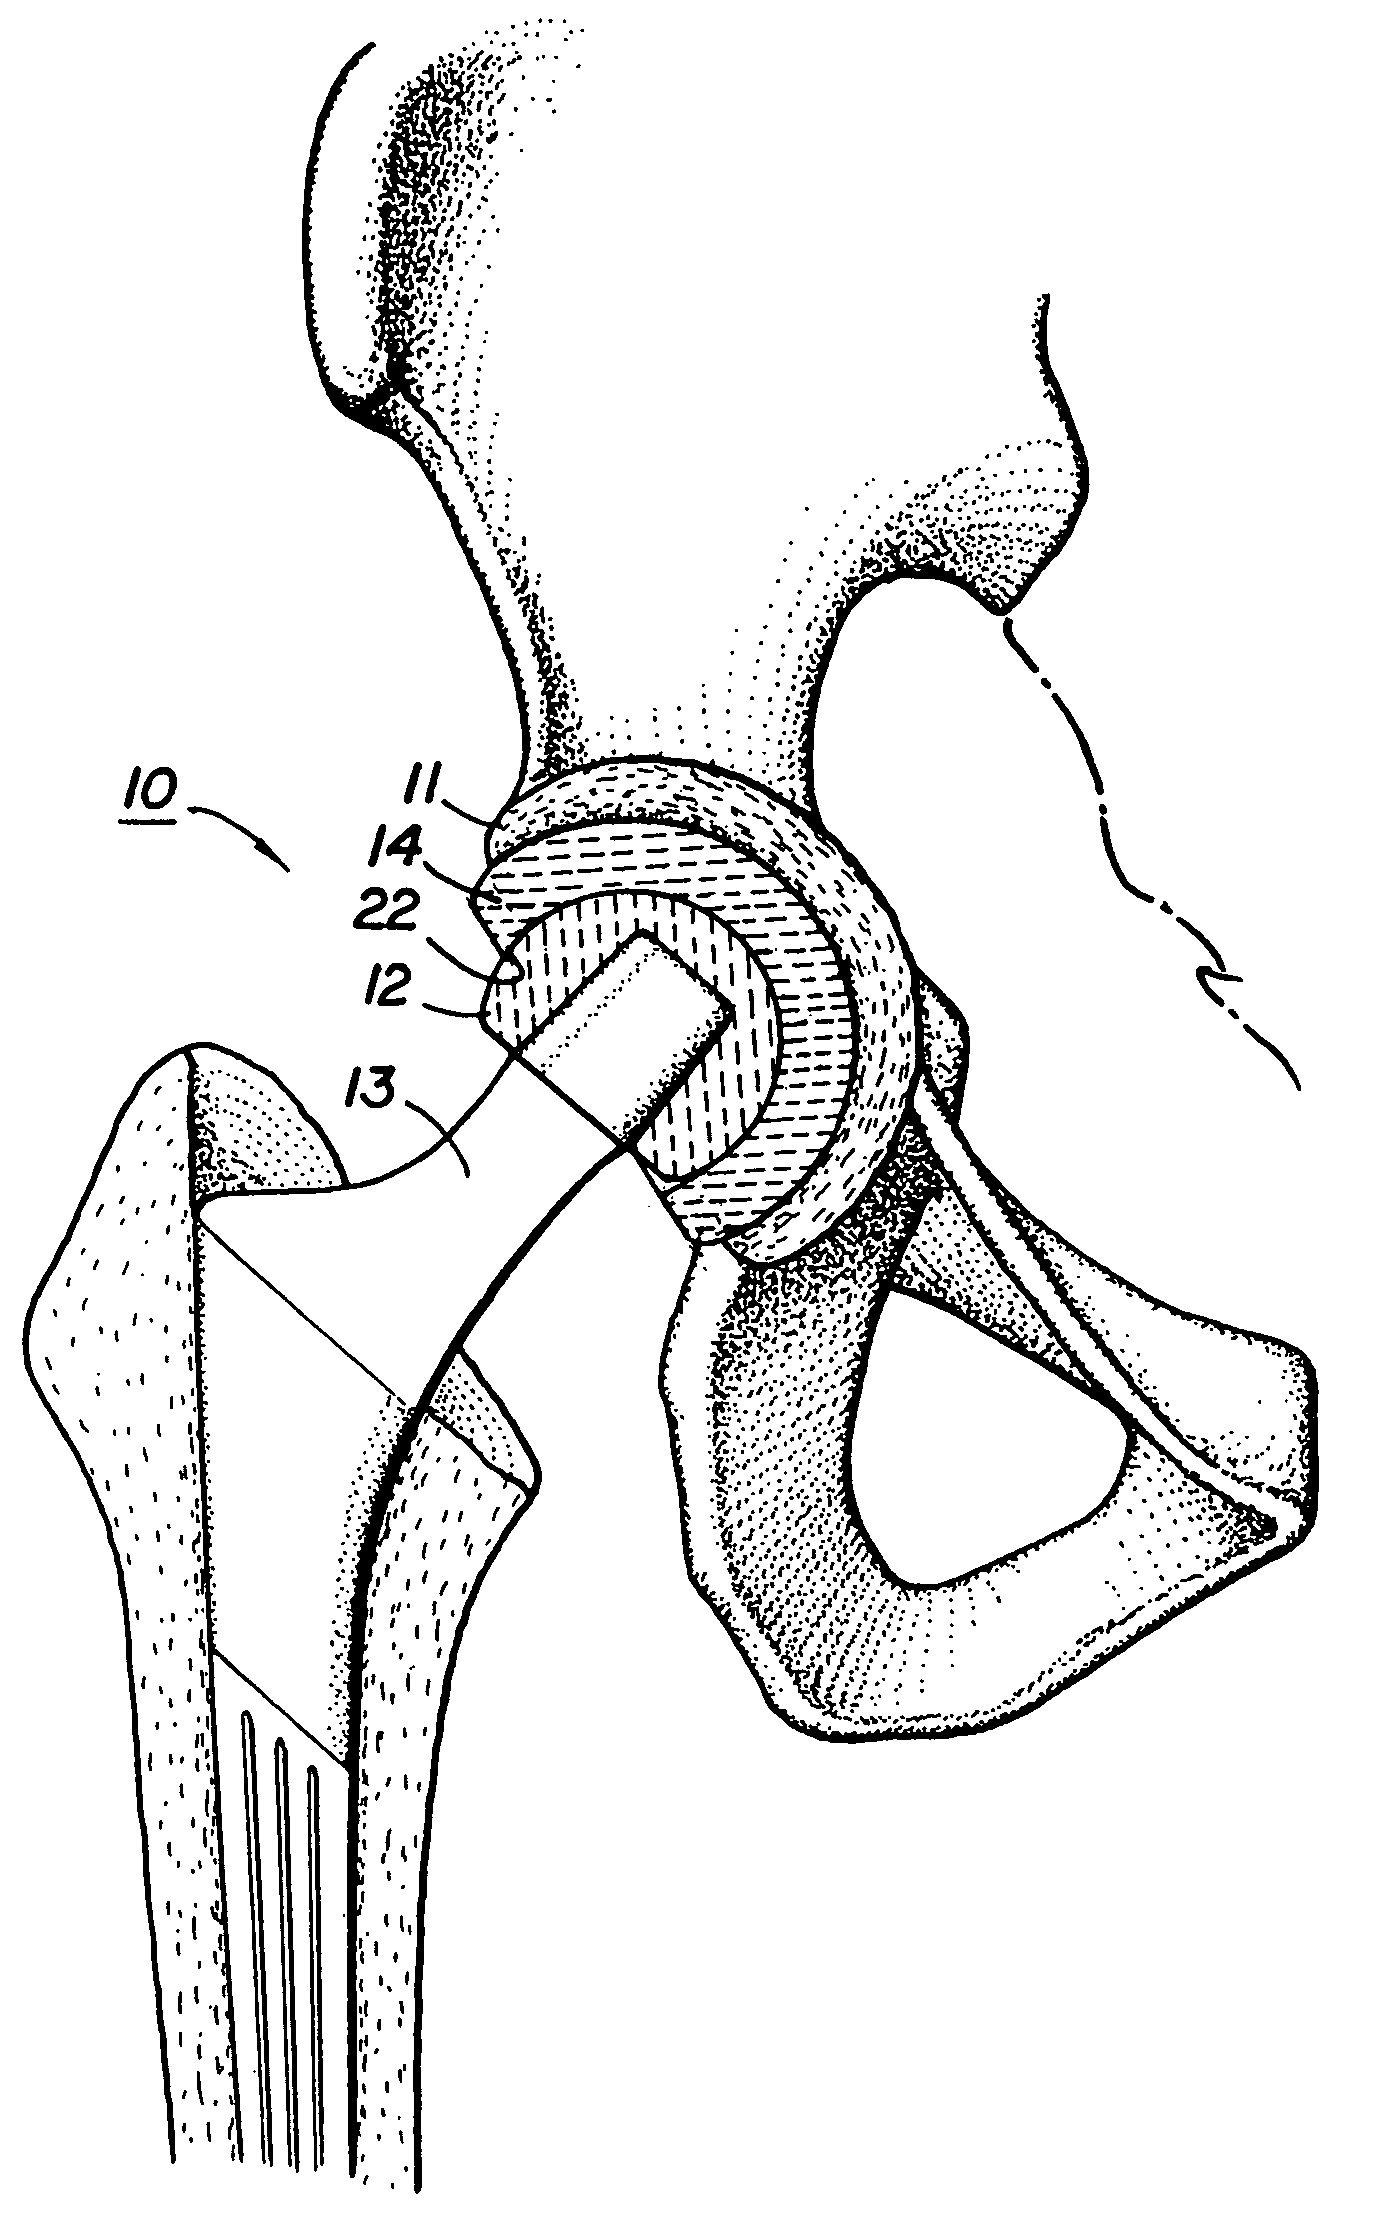 Containment system for constraining a prosthetic component